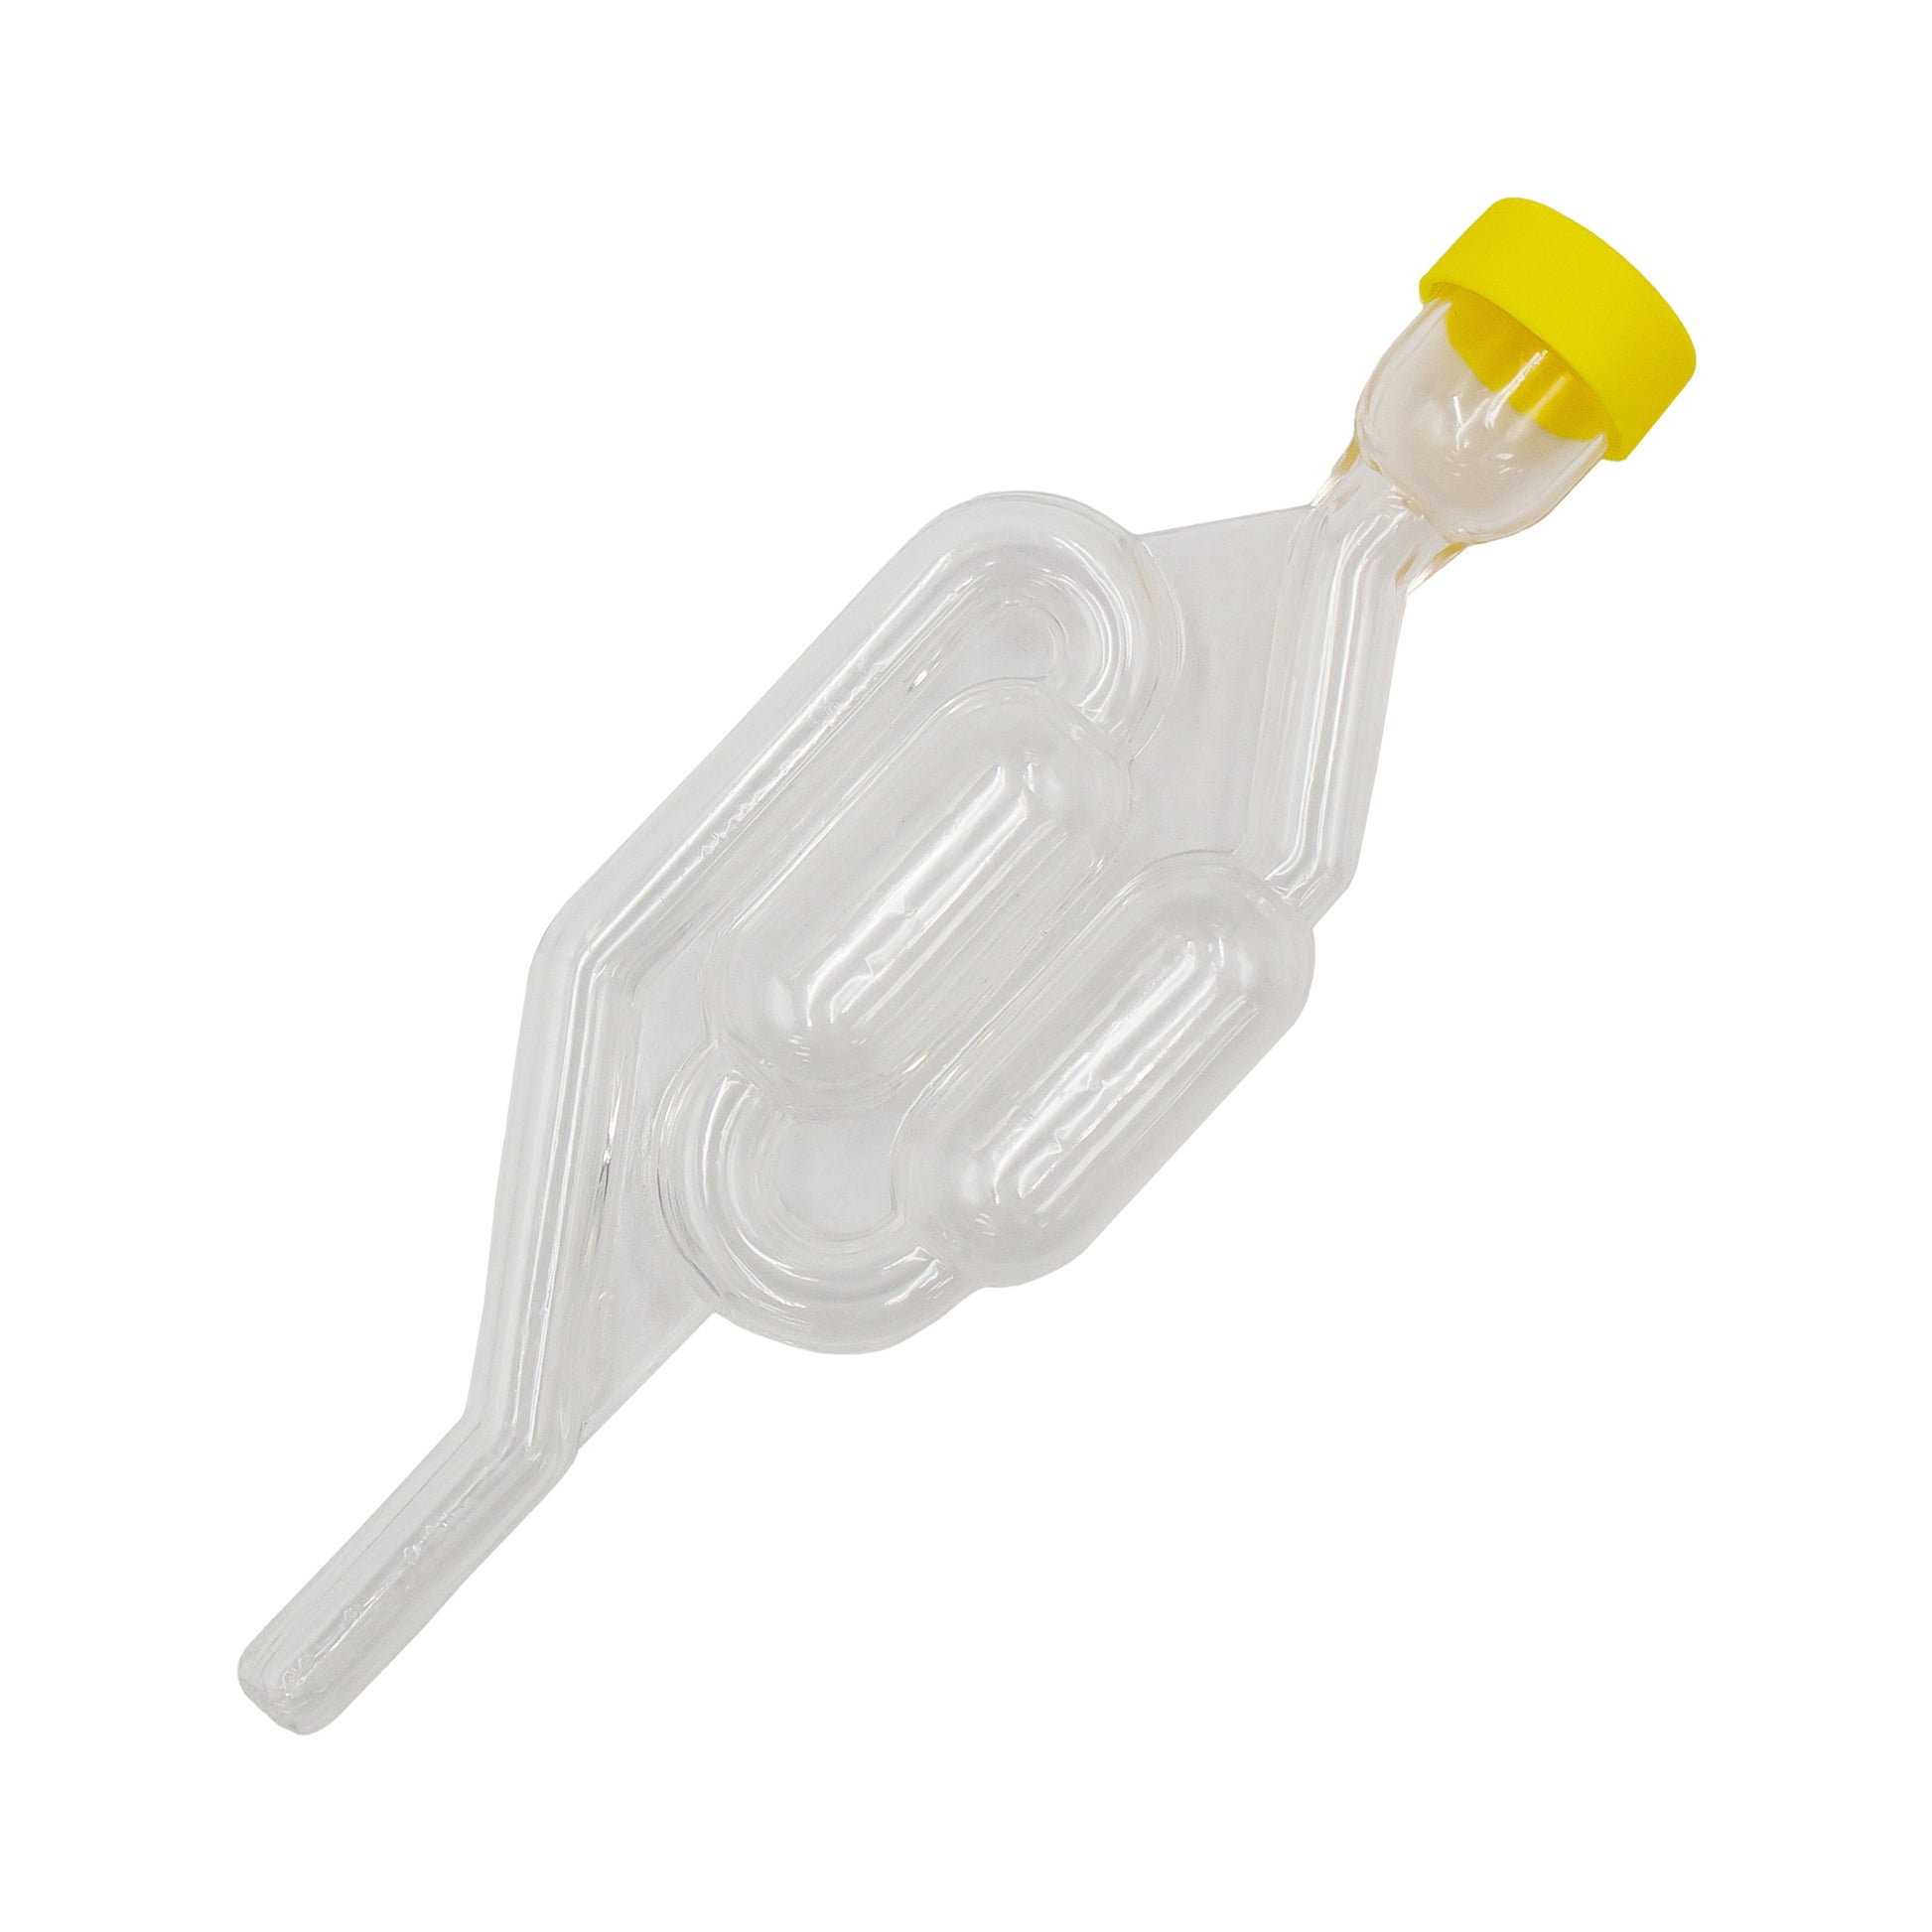 Clear food grade plastic s-type airlock used while fermenting liquids like beer, wine and ciders. 